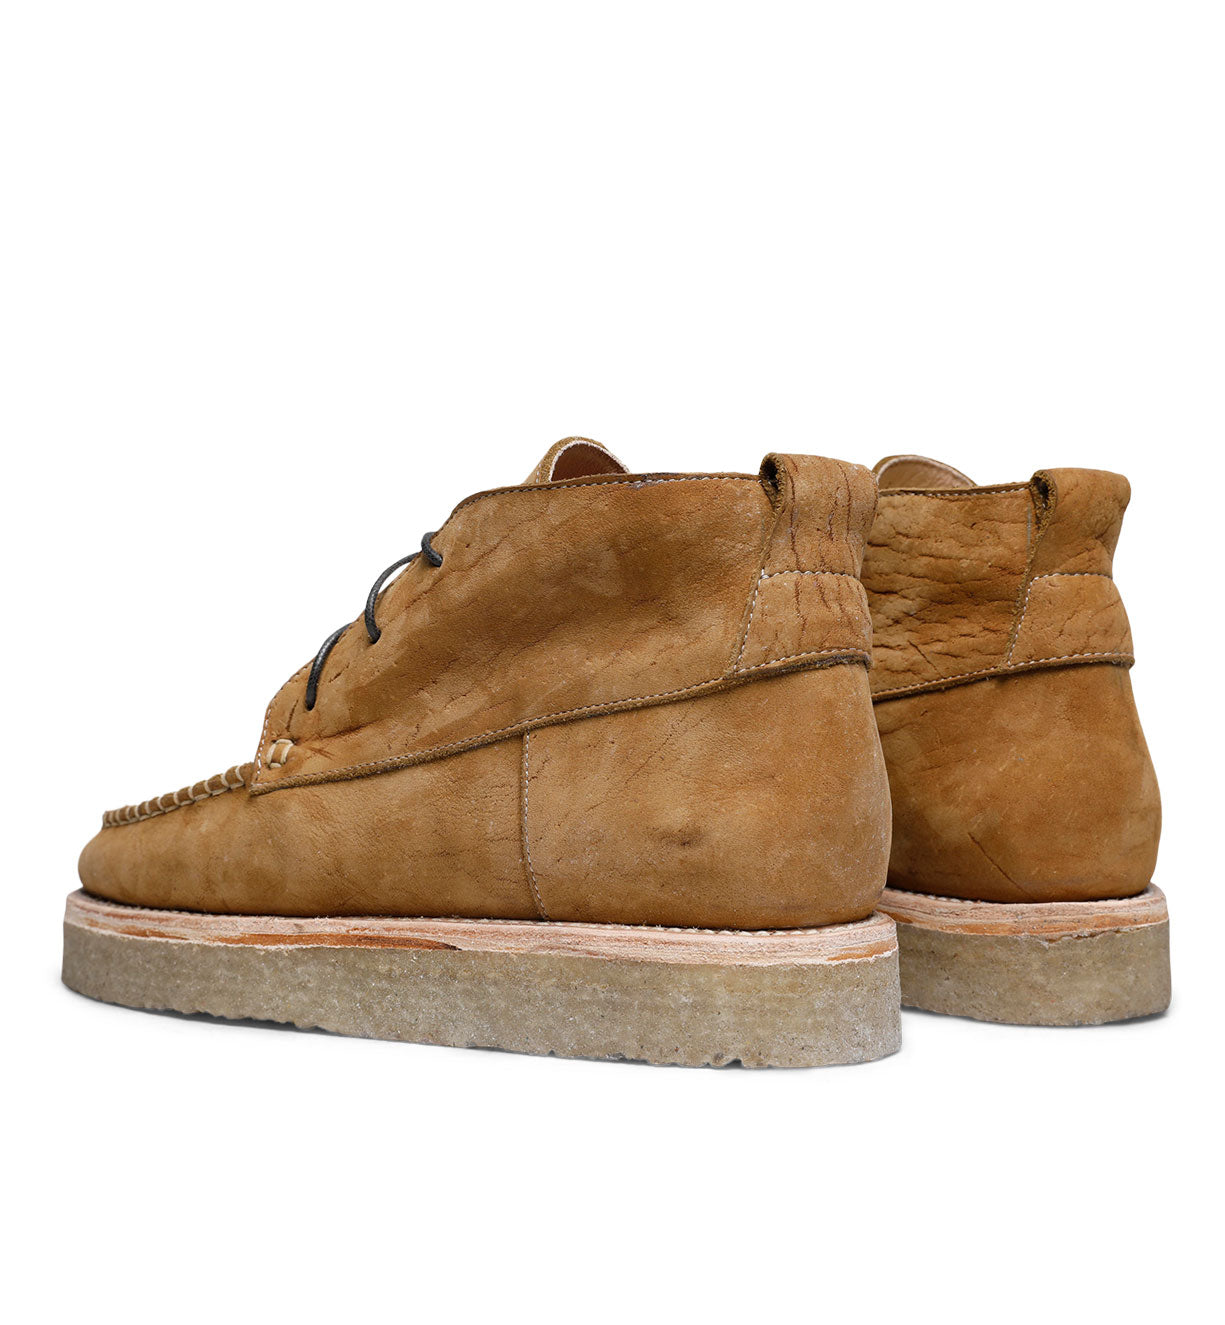 A pair of worn Santa Rosa Brand Tahoma Moccasin boots in brown suede against a white background.